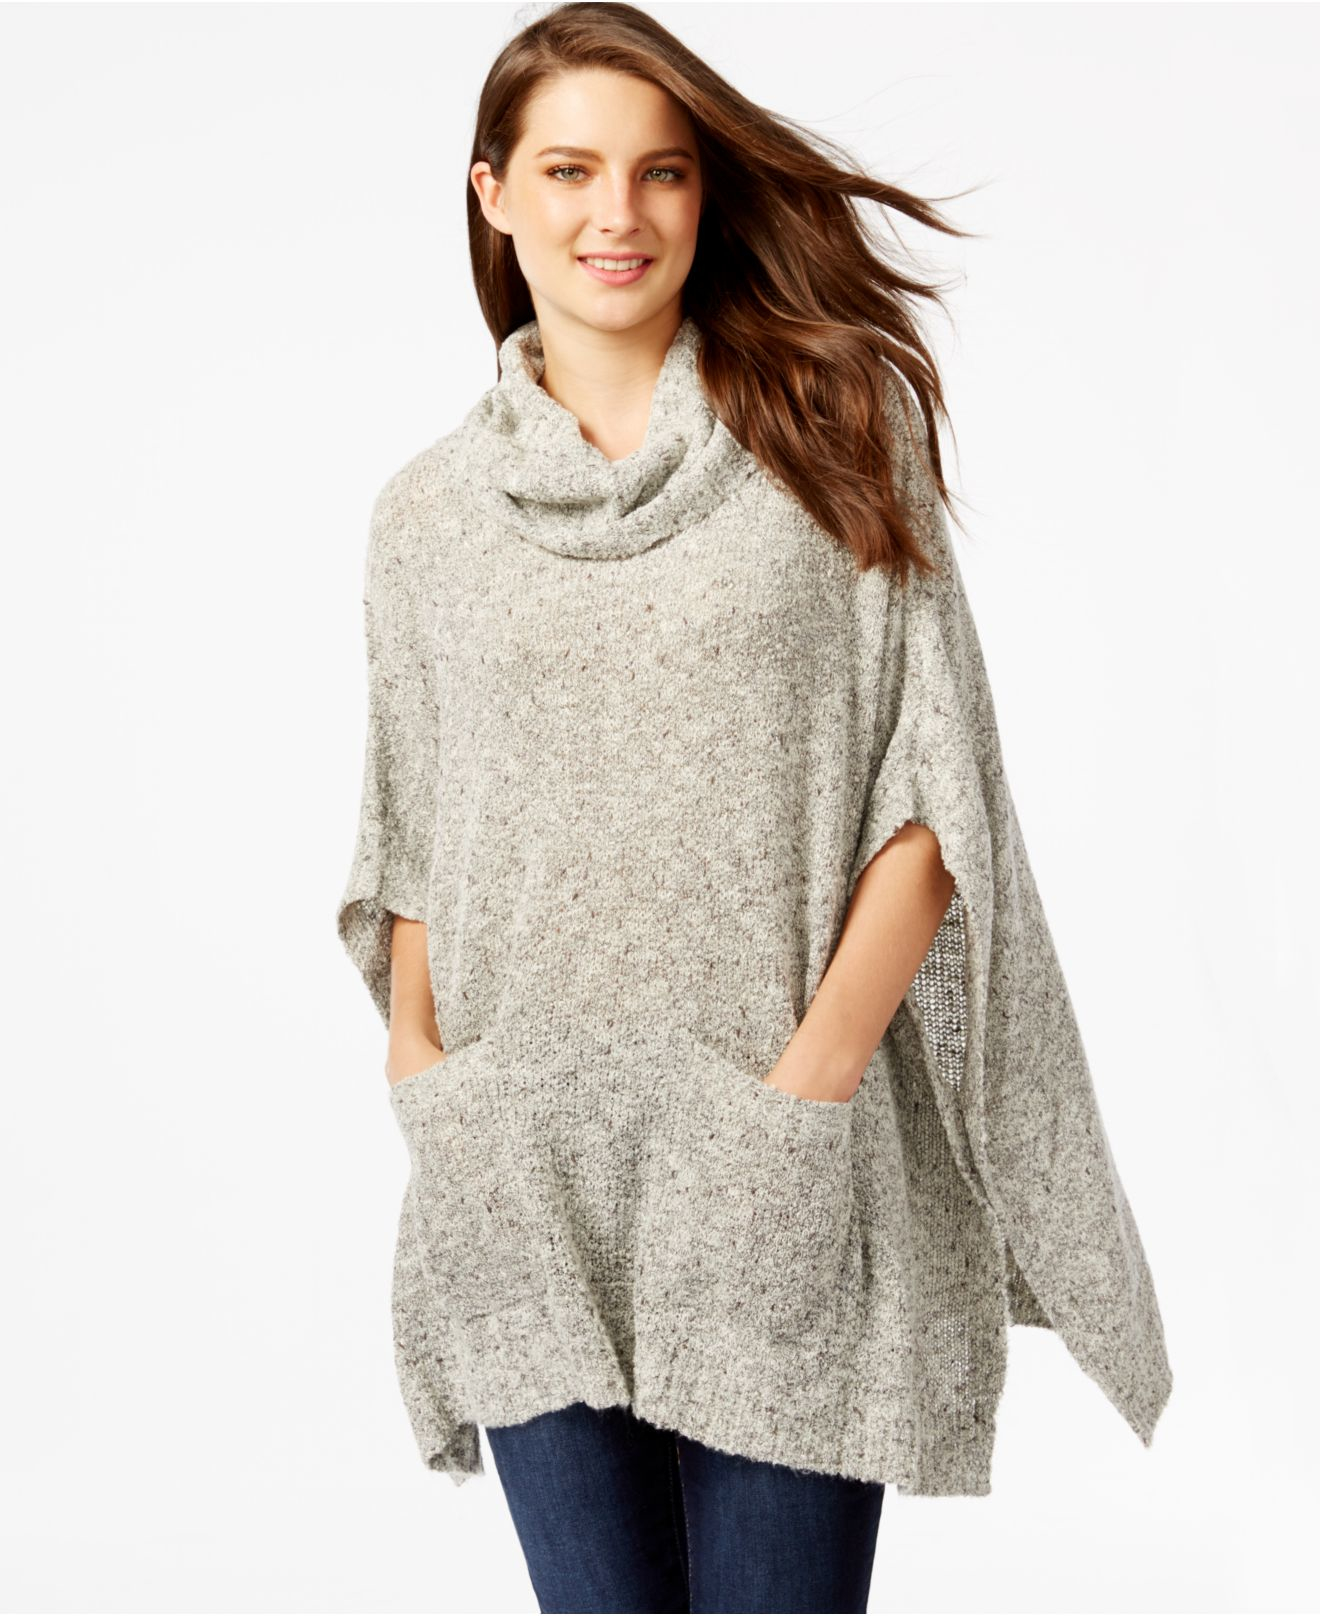 G.h. bass & co. Cowl-neck Poncho in White | Lyst